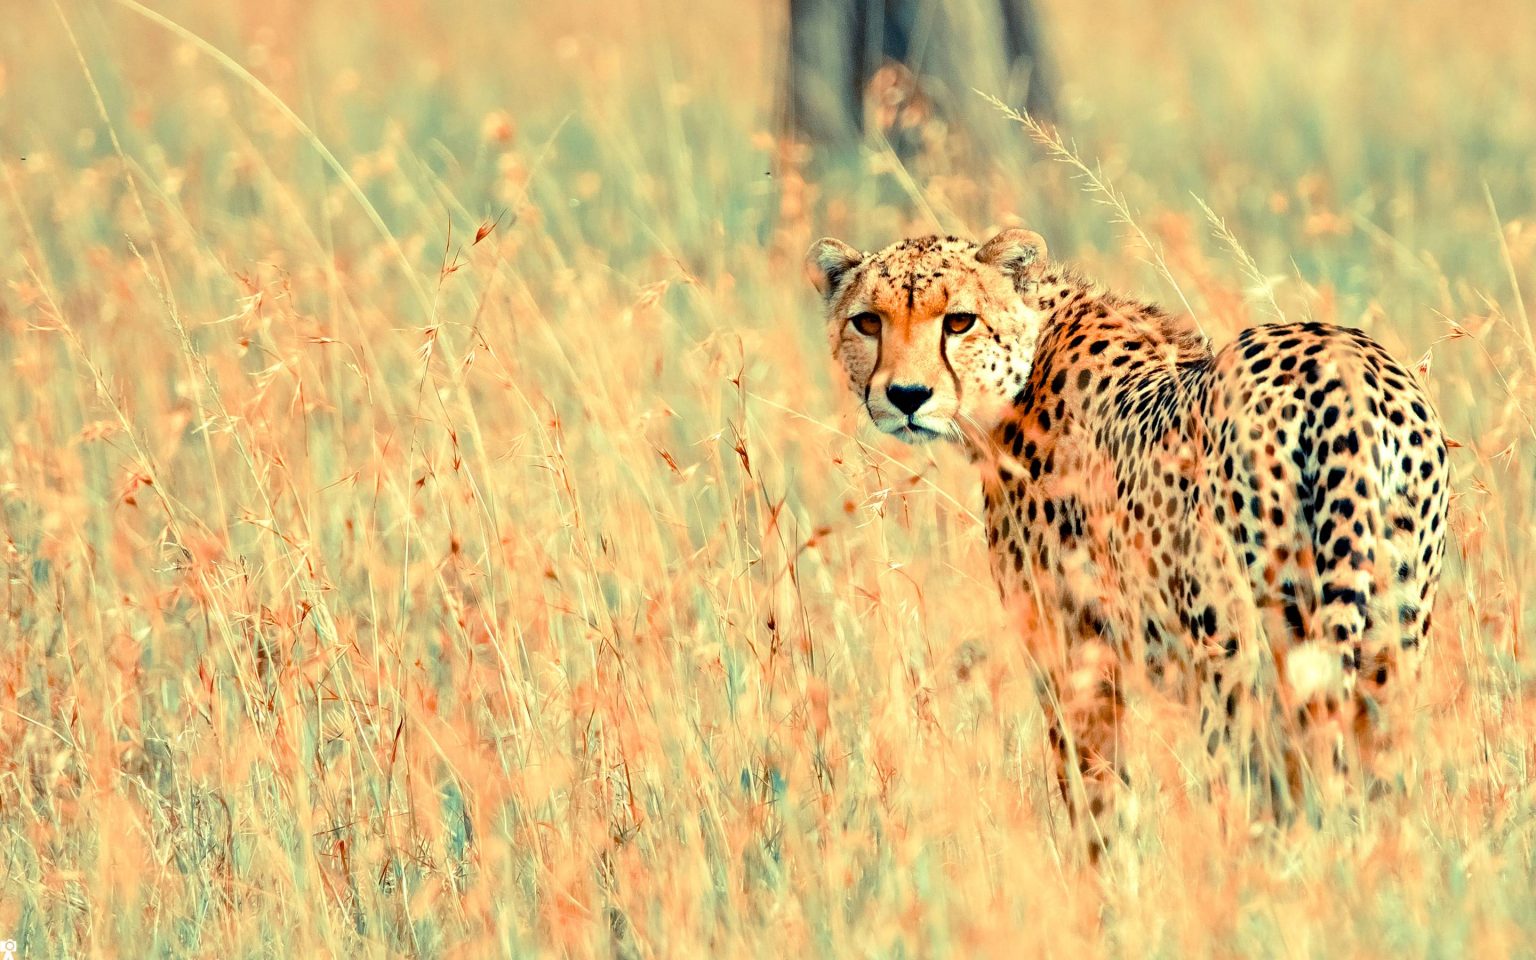 Cheetah Captions And Quotes For Instagram